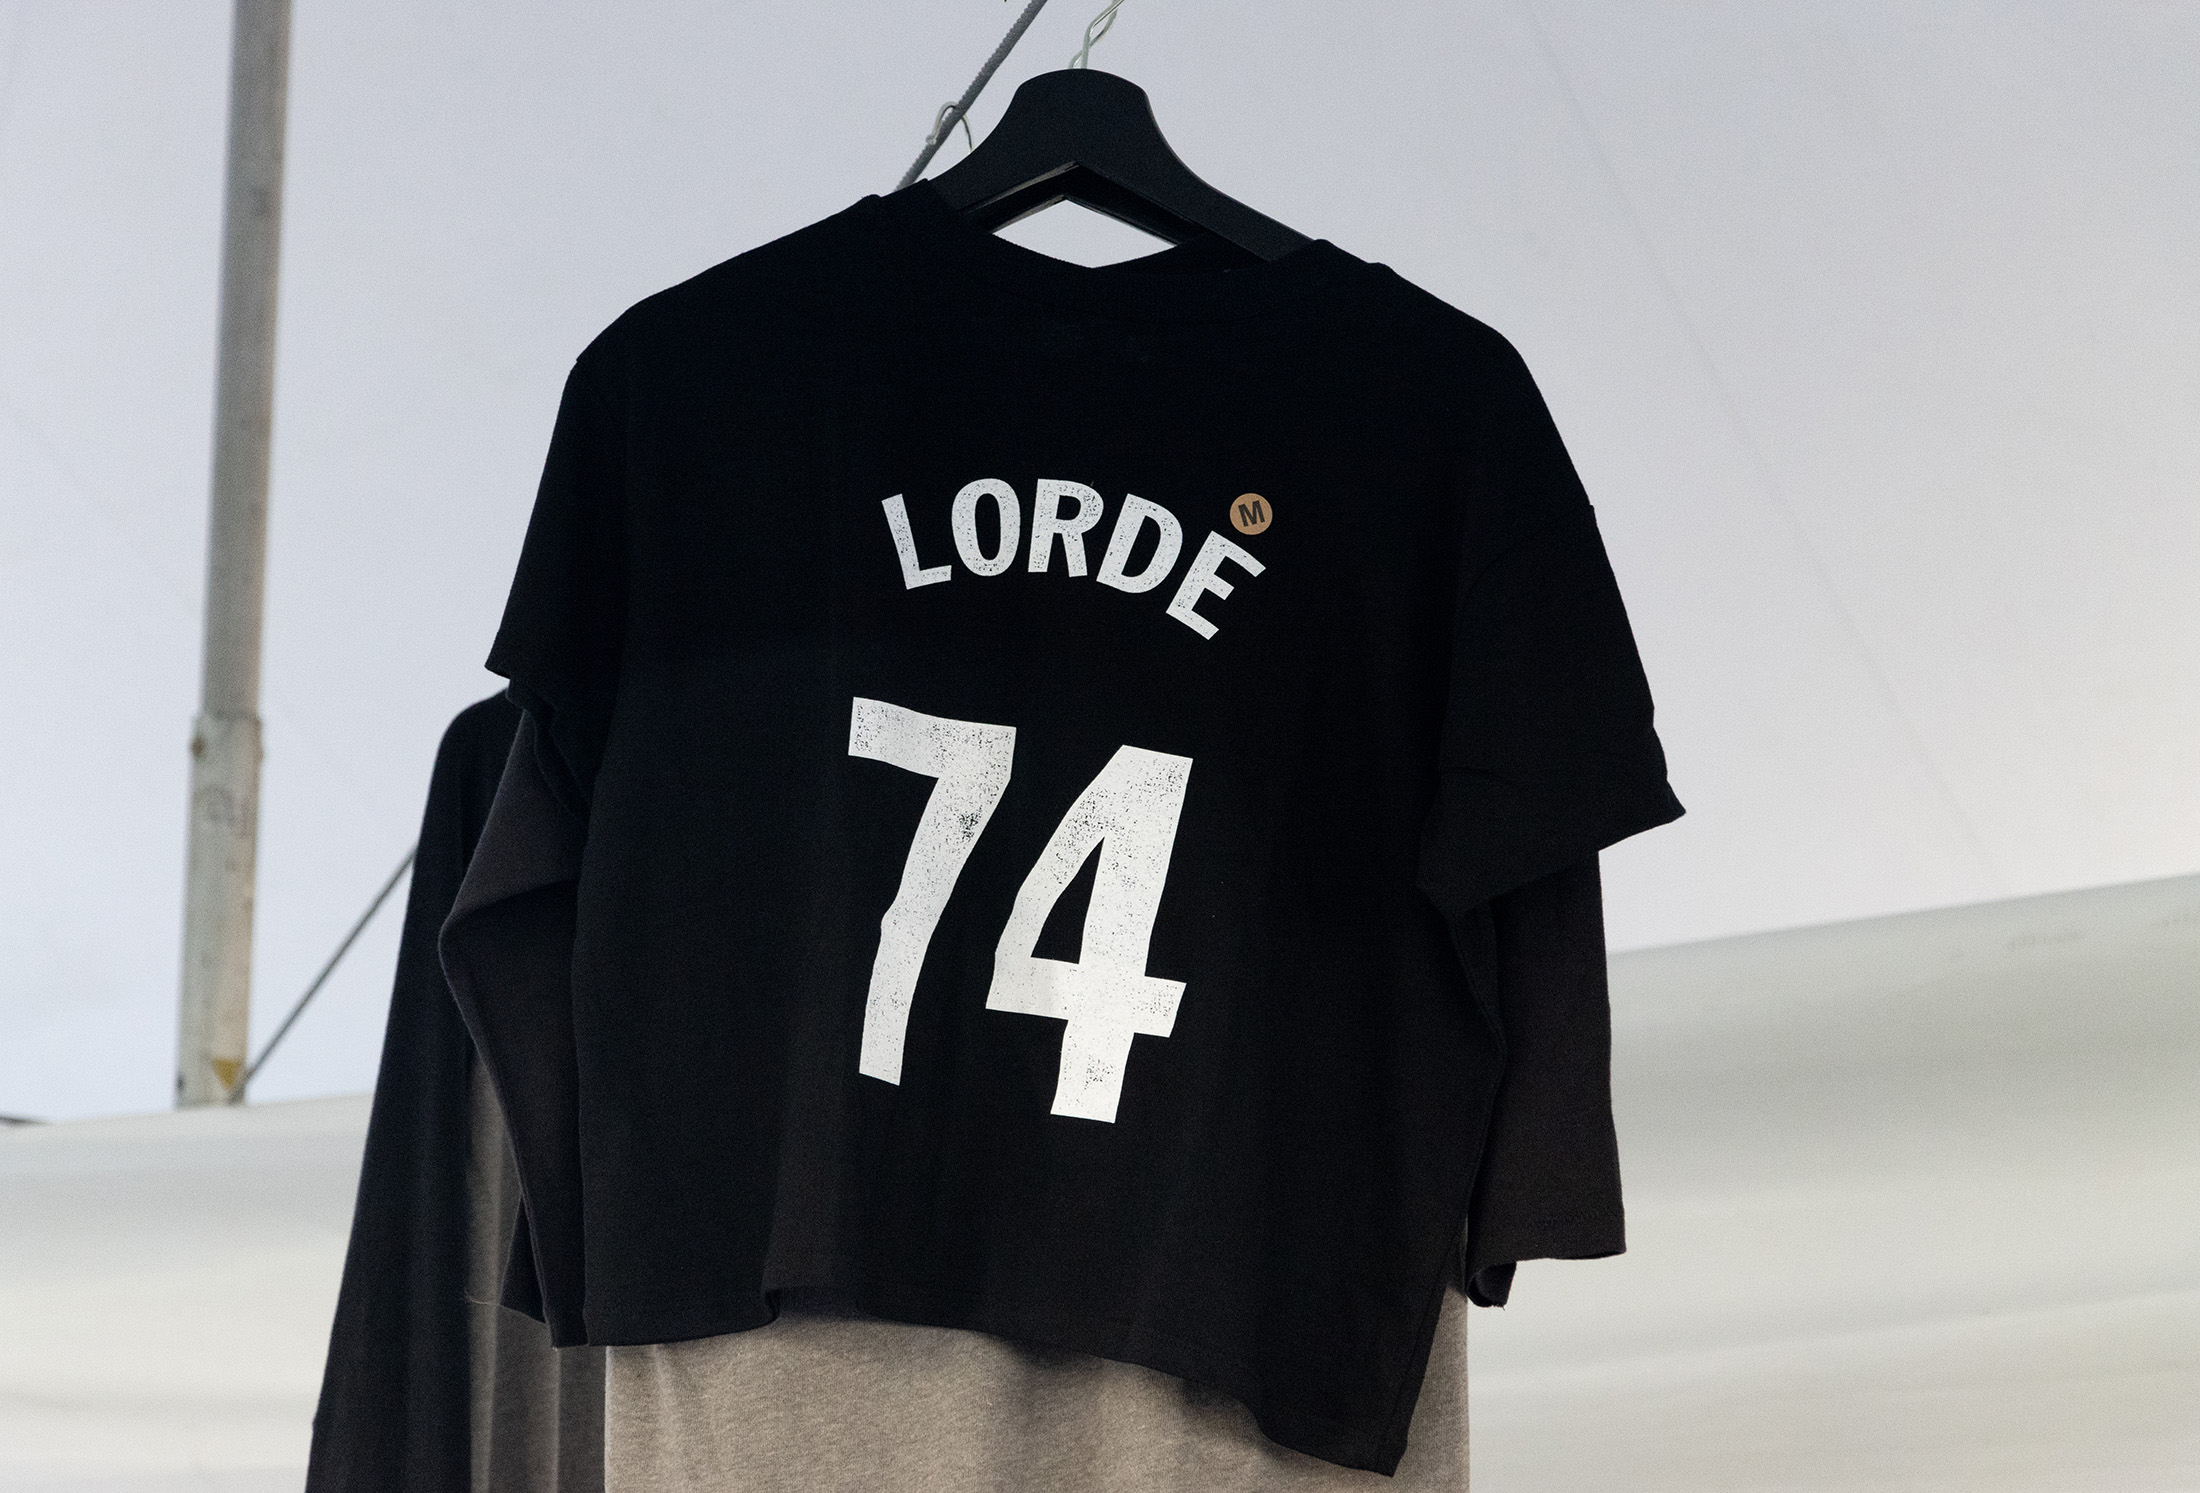 a tshirt with "lorde 74" on it